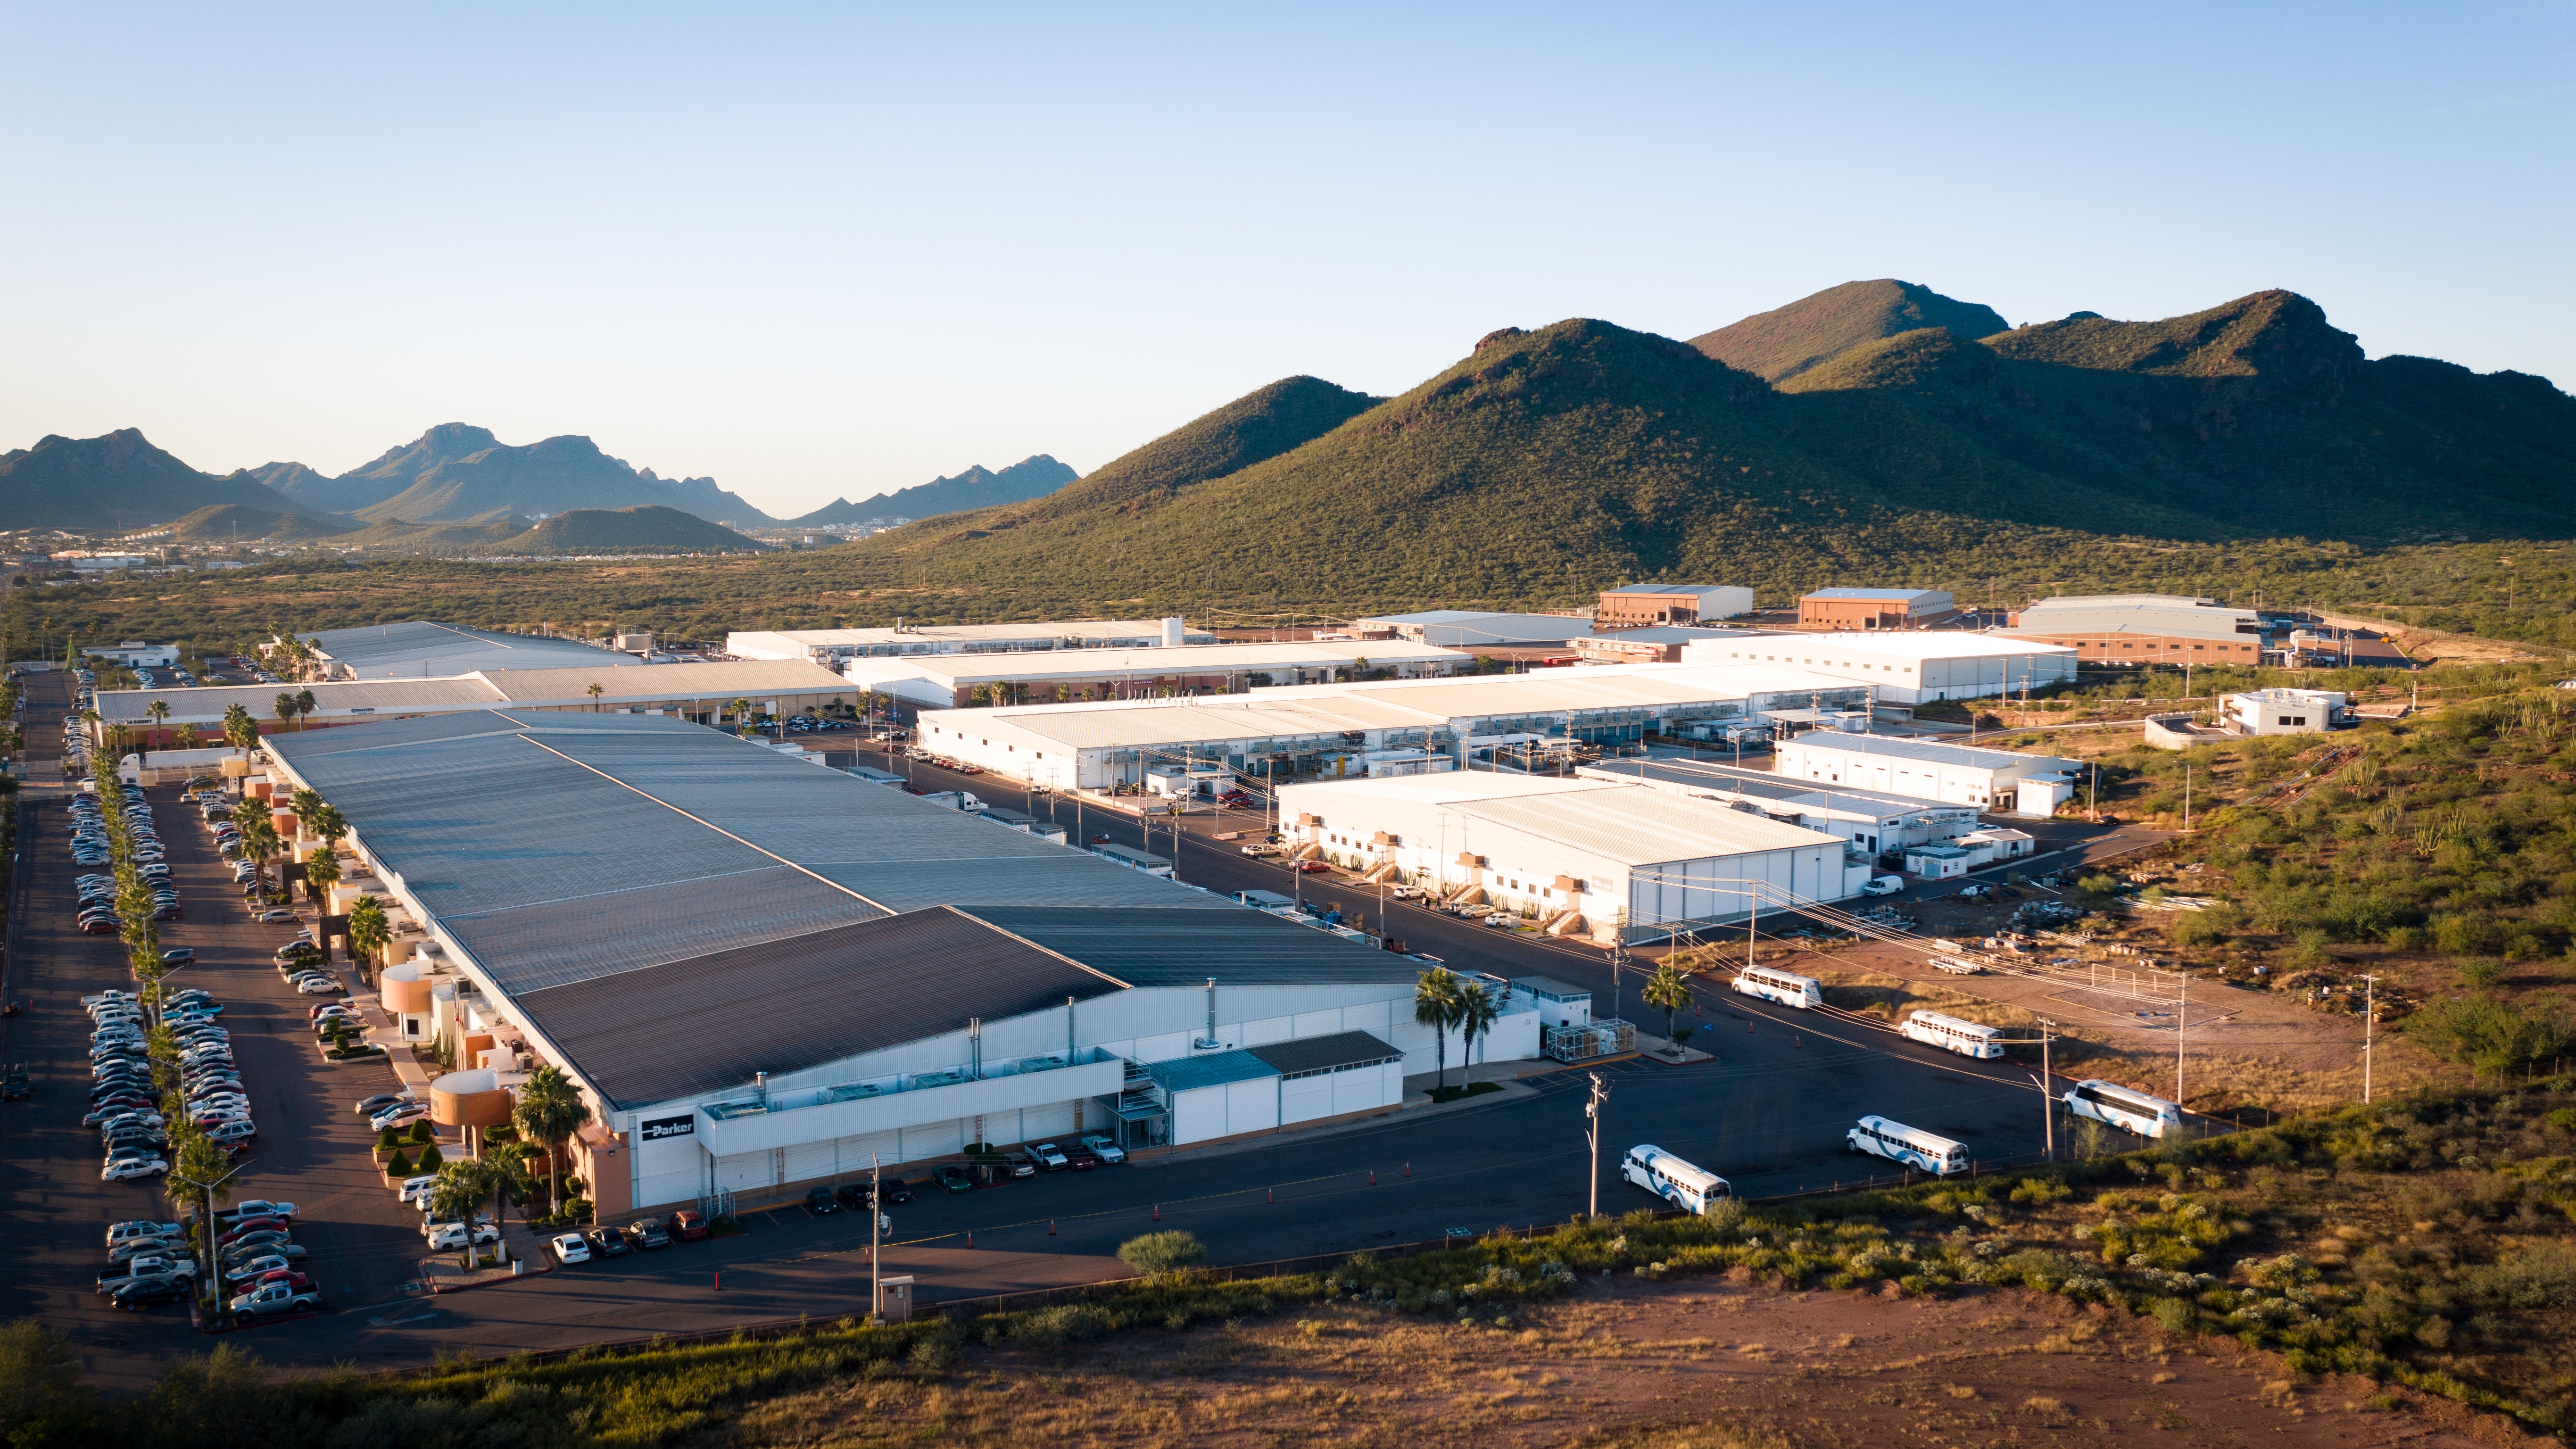 Roca Fuerte Industrial Park in Guaymas, Mexico where many maquiladoras are located